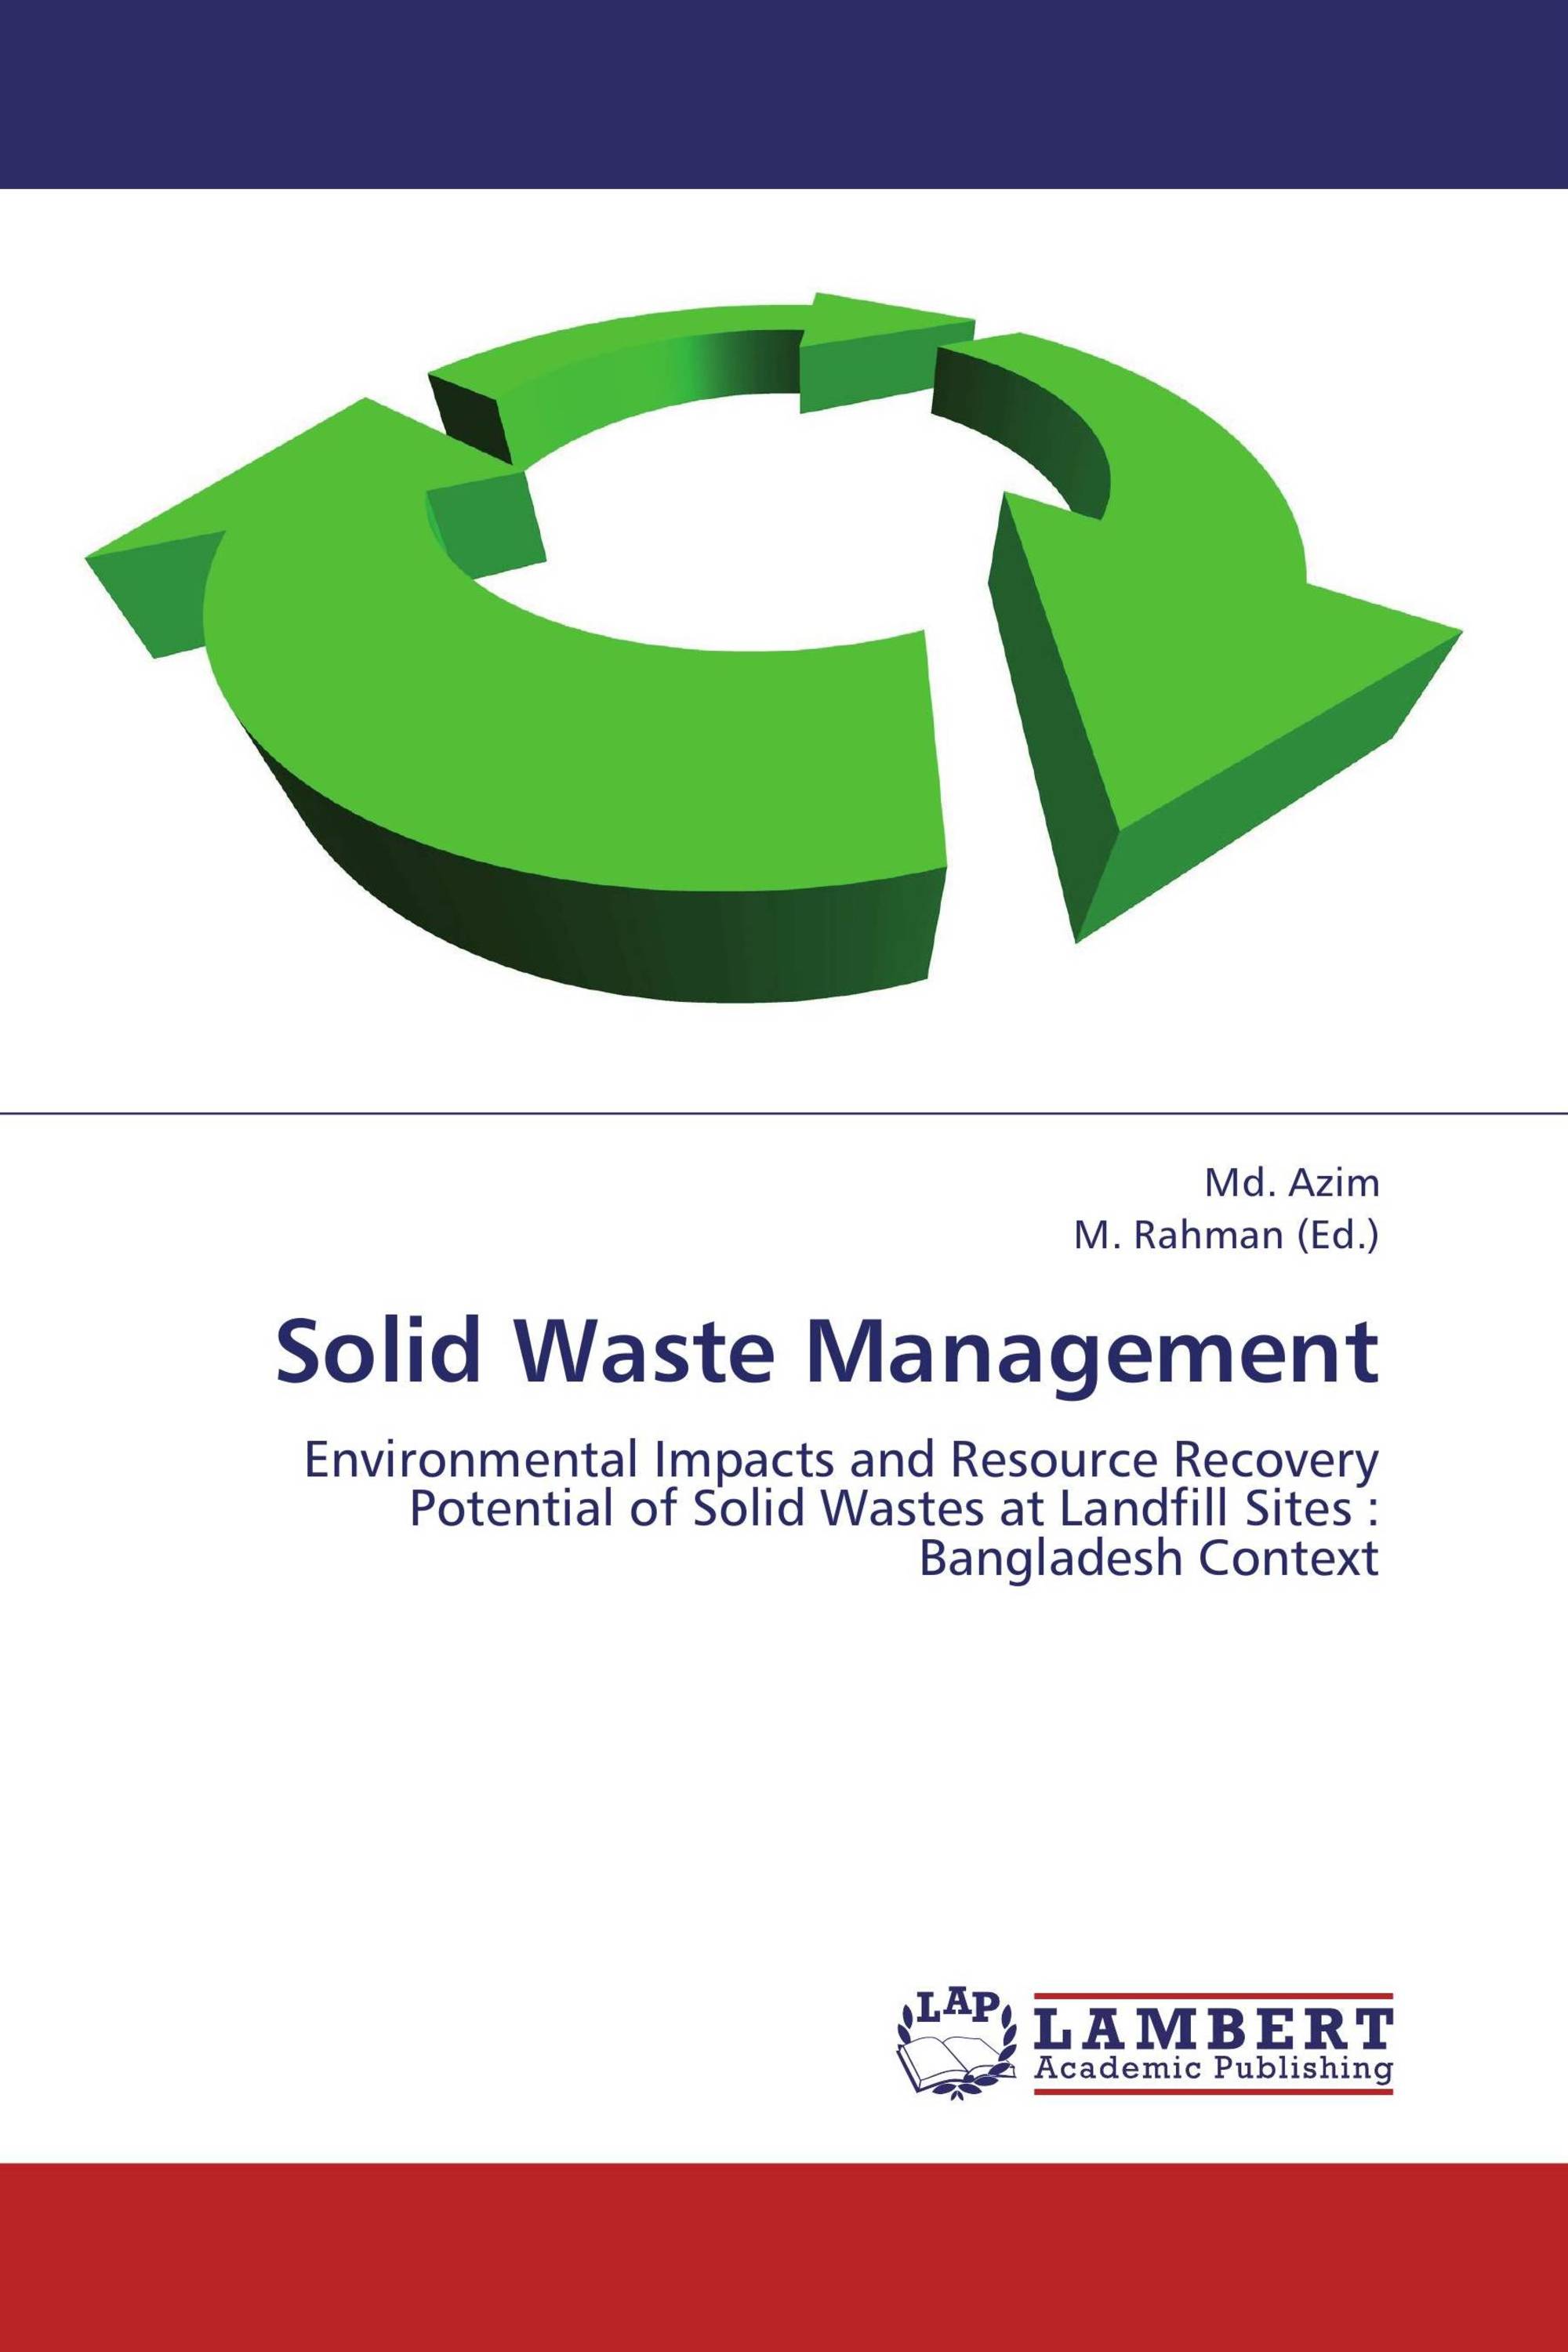 research about solid waste management